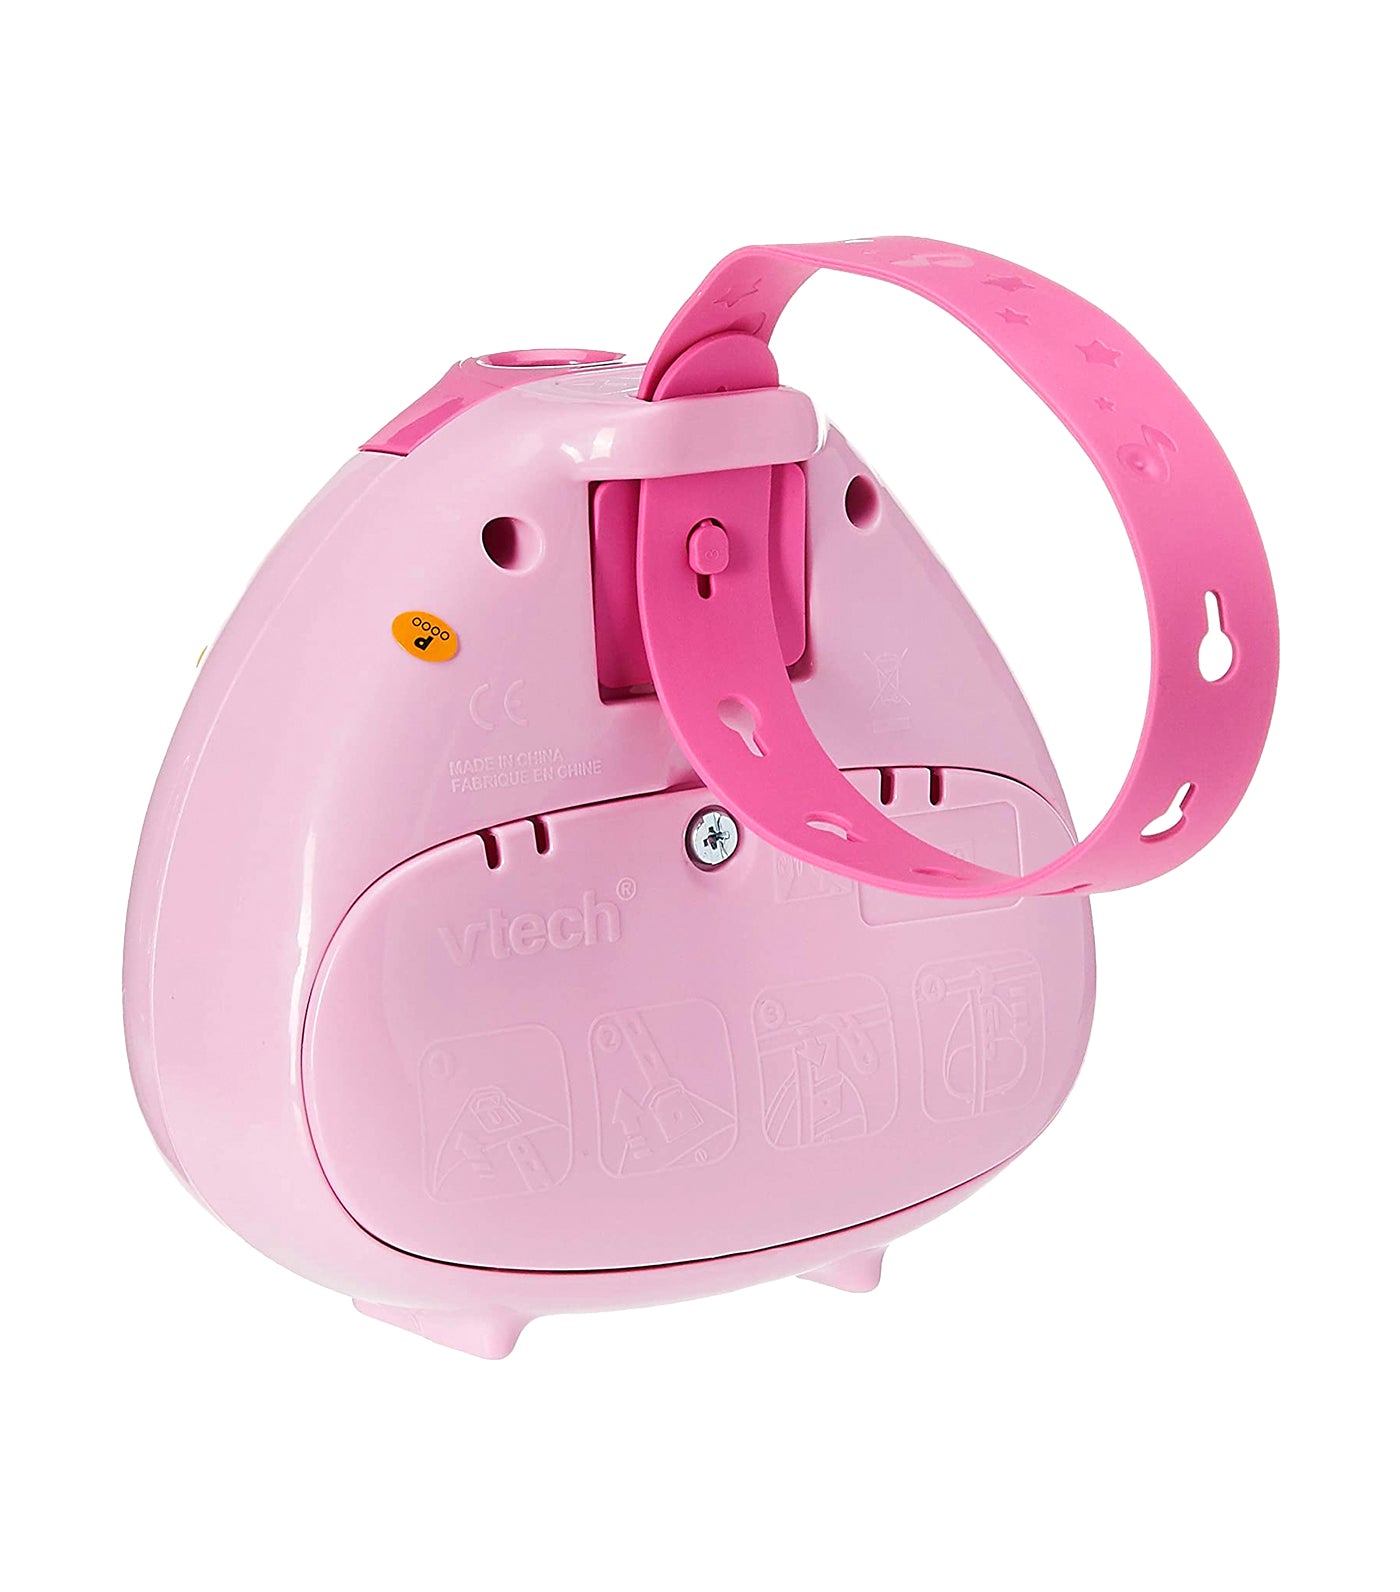 vtech pink lullaby teddy projector 